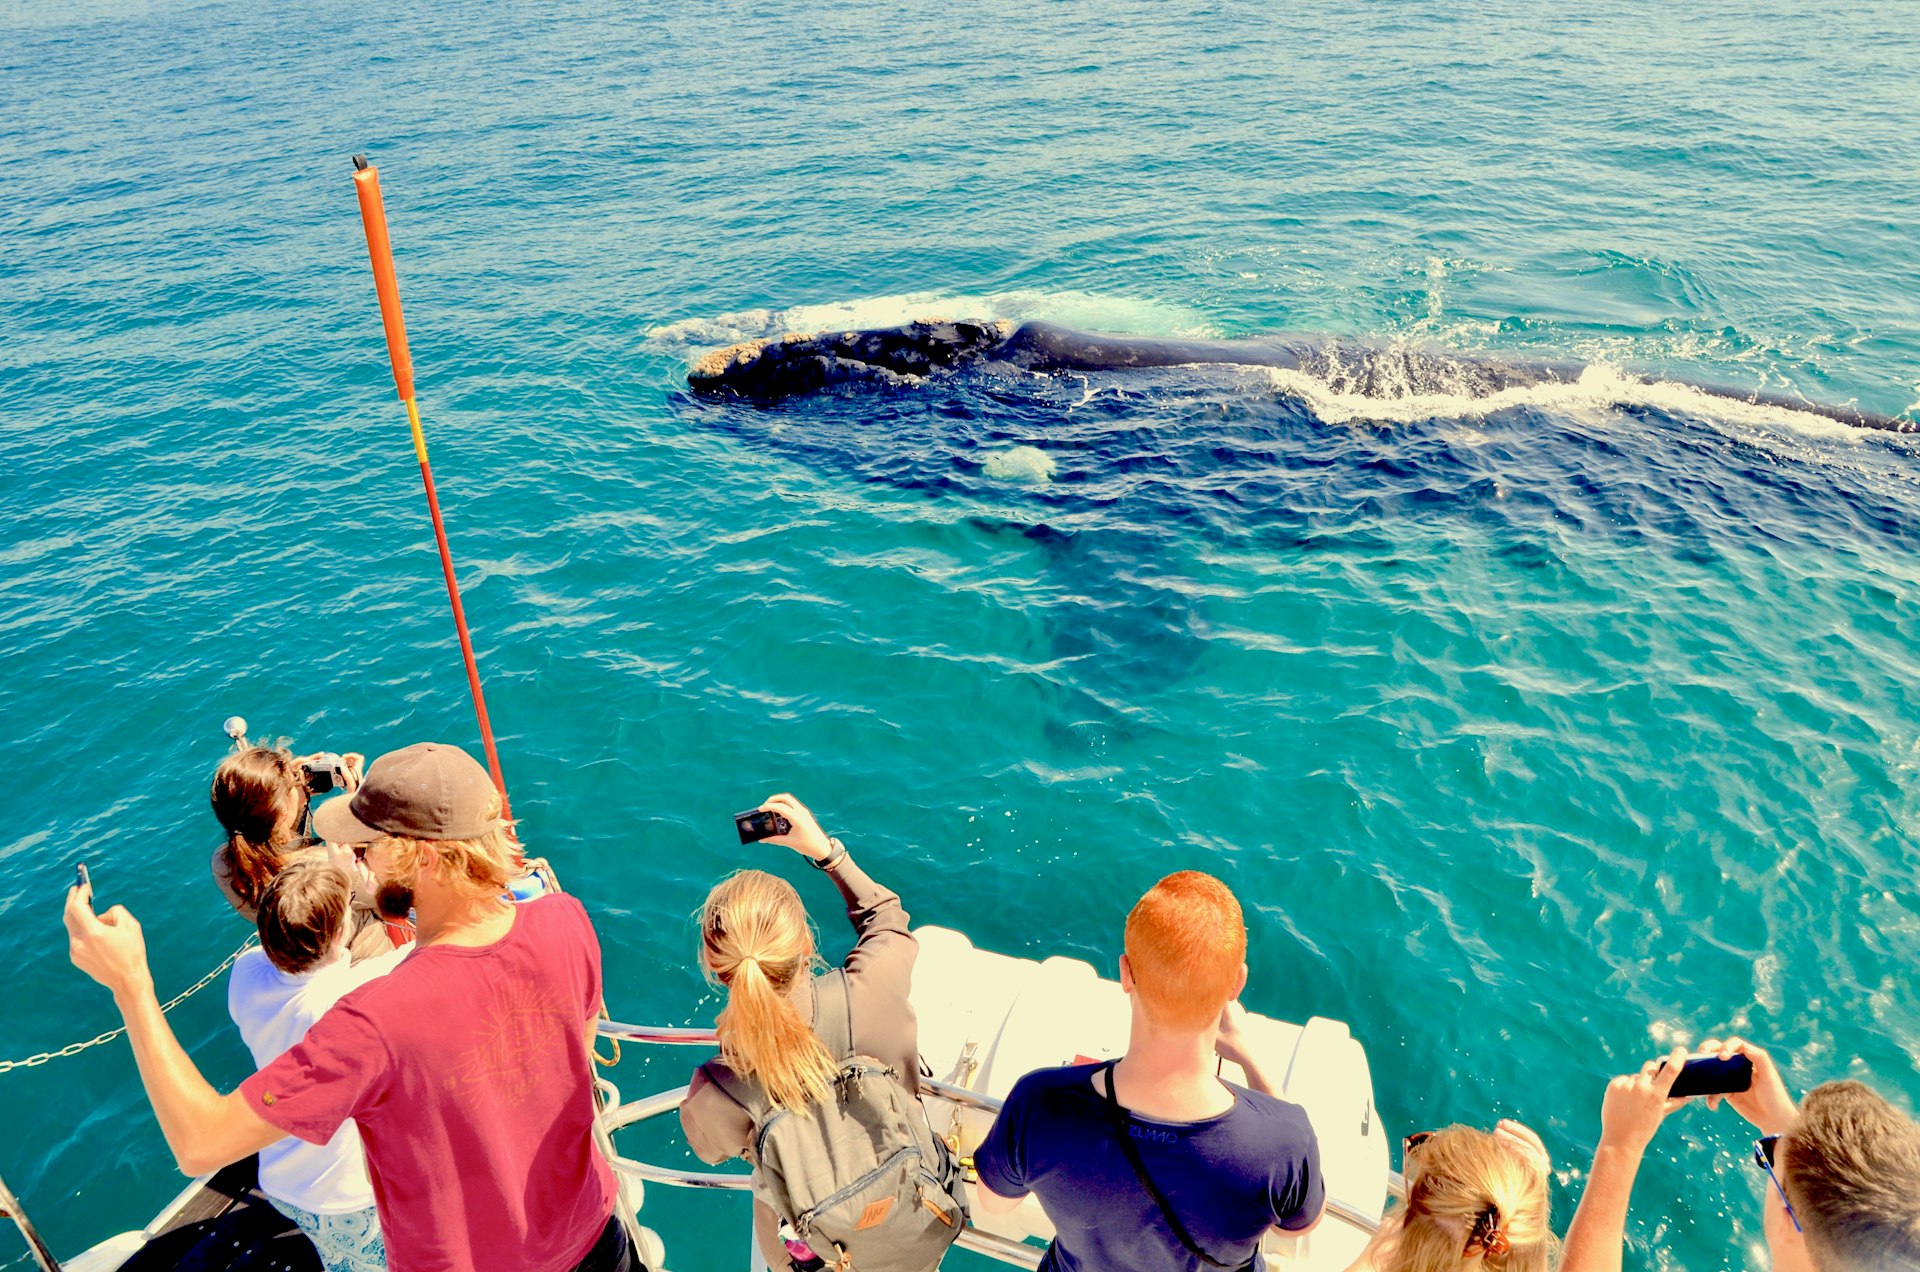 Tourists on board whale watching ship taking photo of mother whale and white calf in water off the waters of Walker Bay near Hermanus, Cape Overberg, South Africa